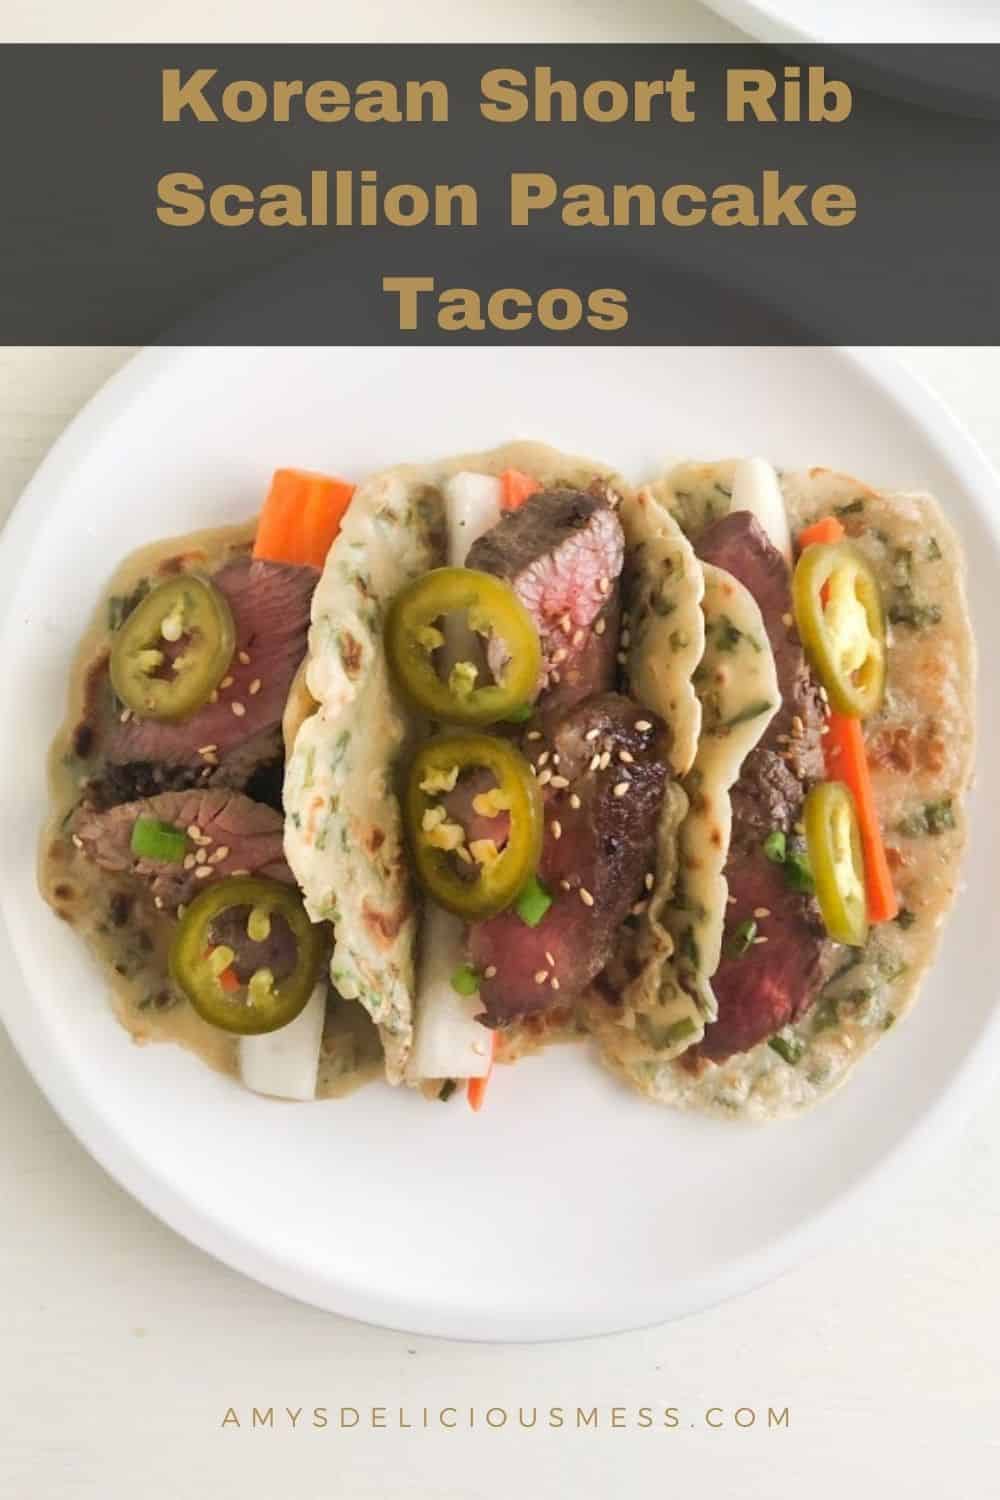 3 scallion pancake tacos on round white plate. Tacos filled with sliced short ribs, pickled daikon, carrot, and jalapenos.